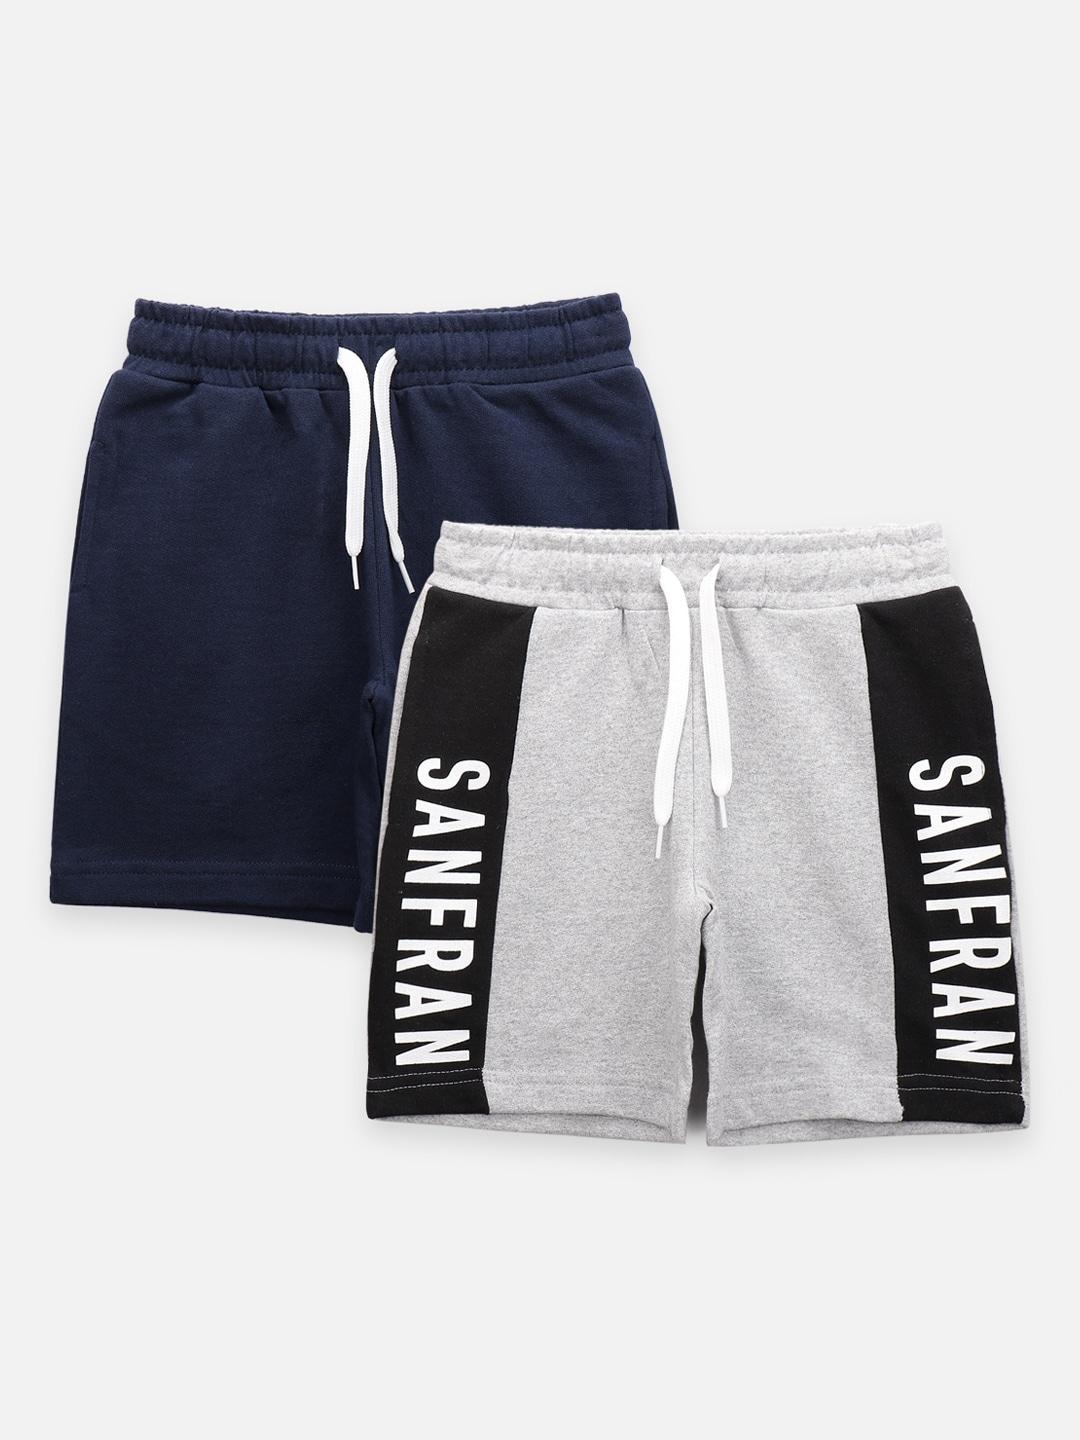 lilpicks boys pack of 2 grey & navy blue typography printed cotton shorts